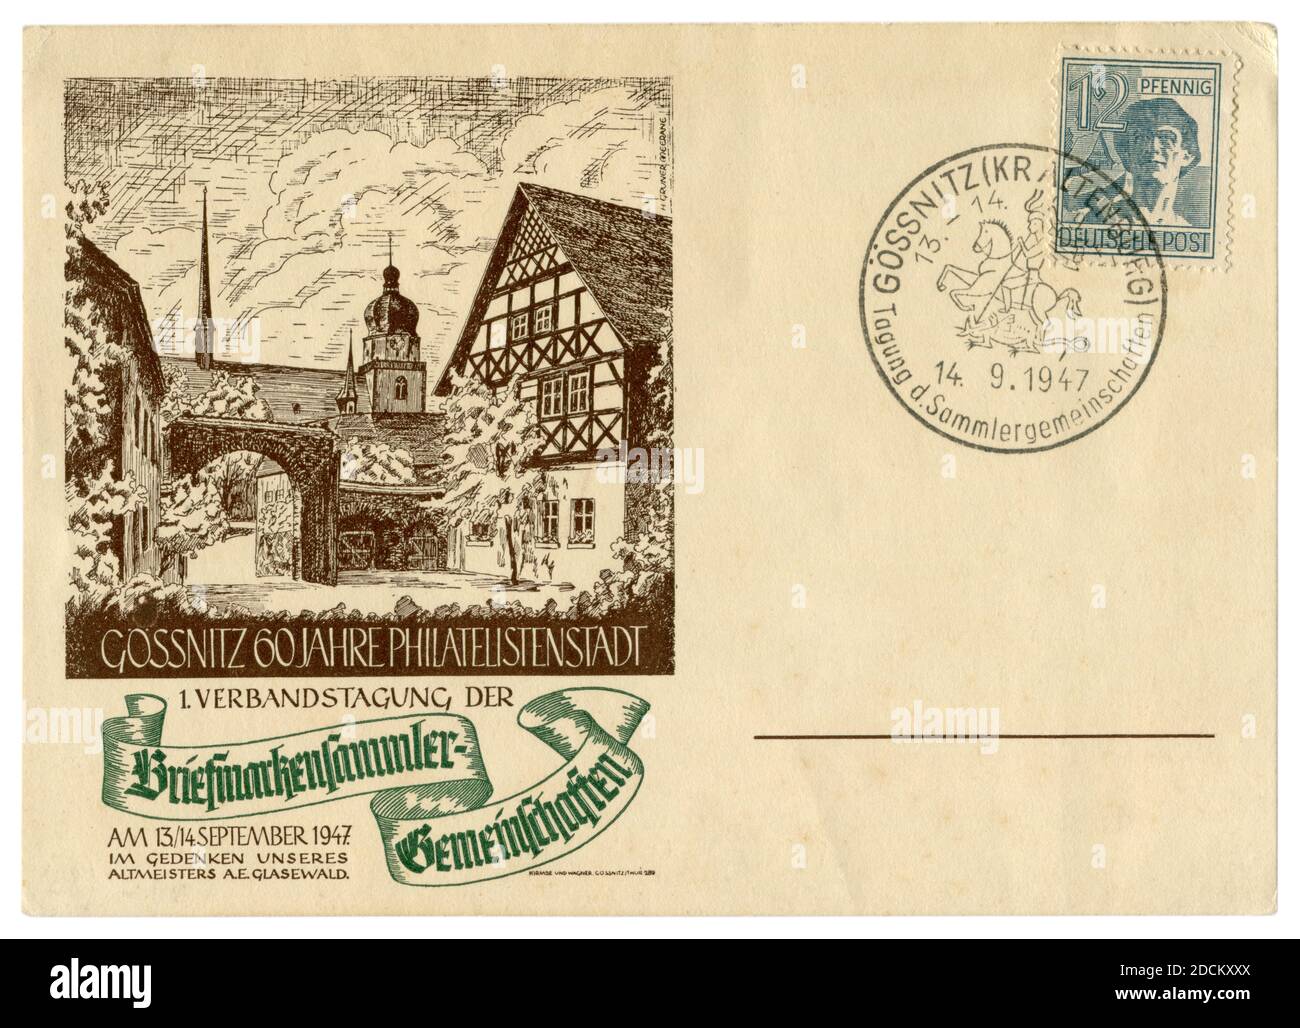 Gößnitz, Thuringia, GERMANY — 14 September 1947: Gössnitz 60 years of the philatelists of the city, 1 Association meeting of the stamp collectors Stock Photo